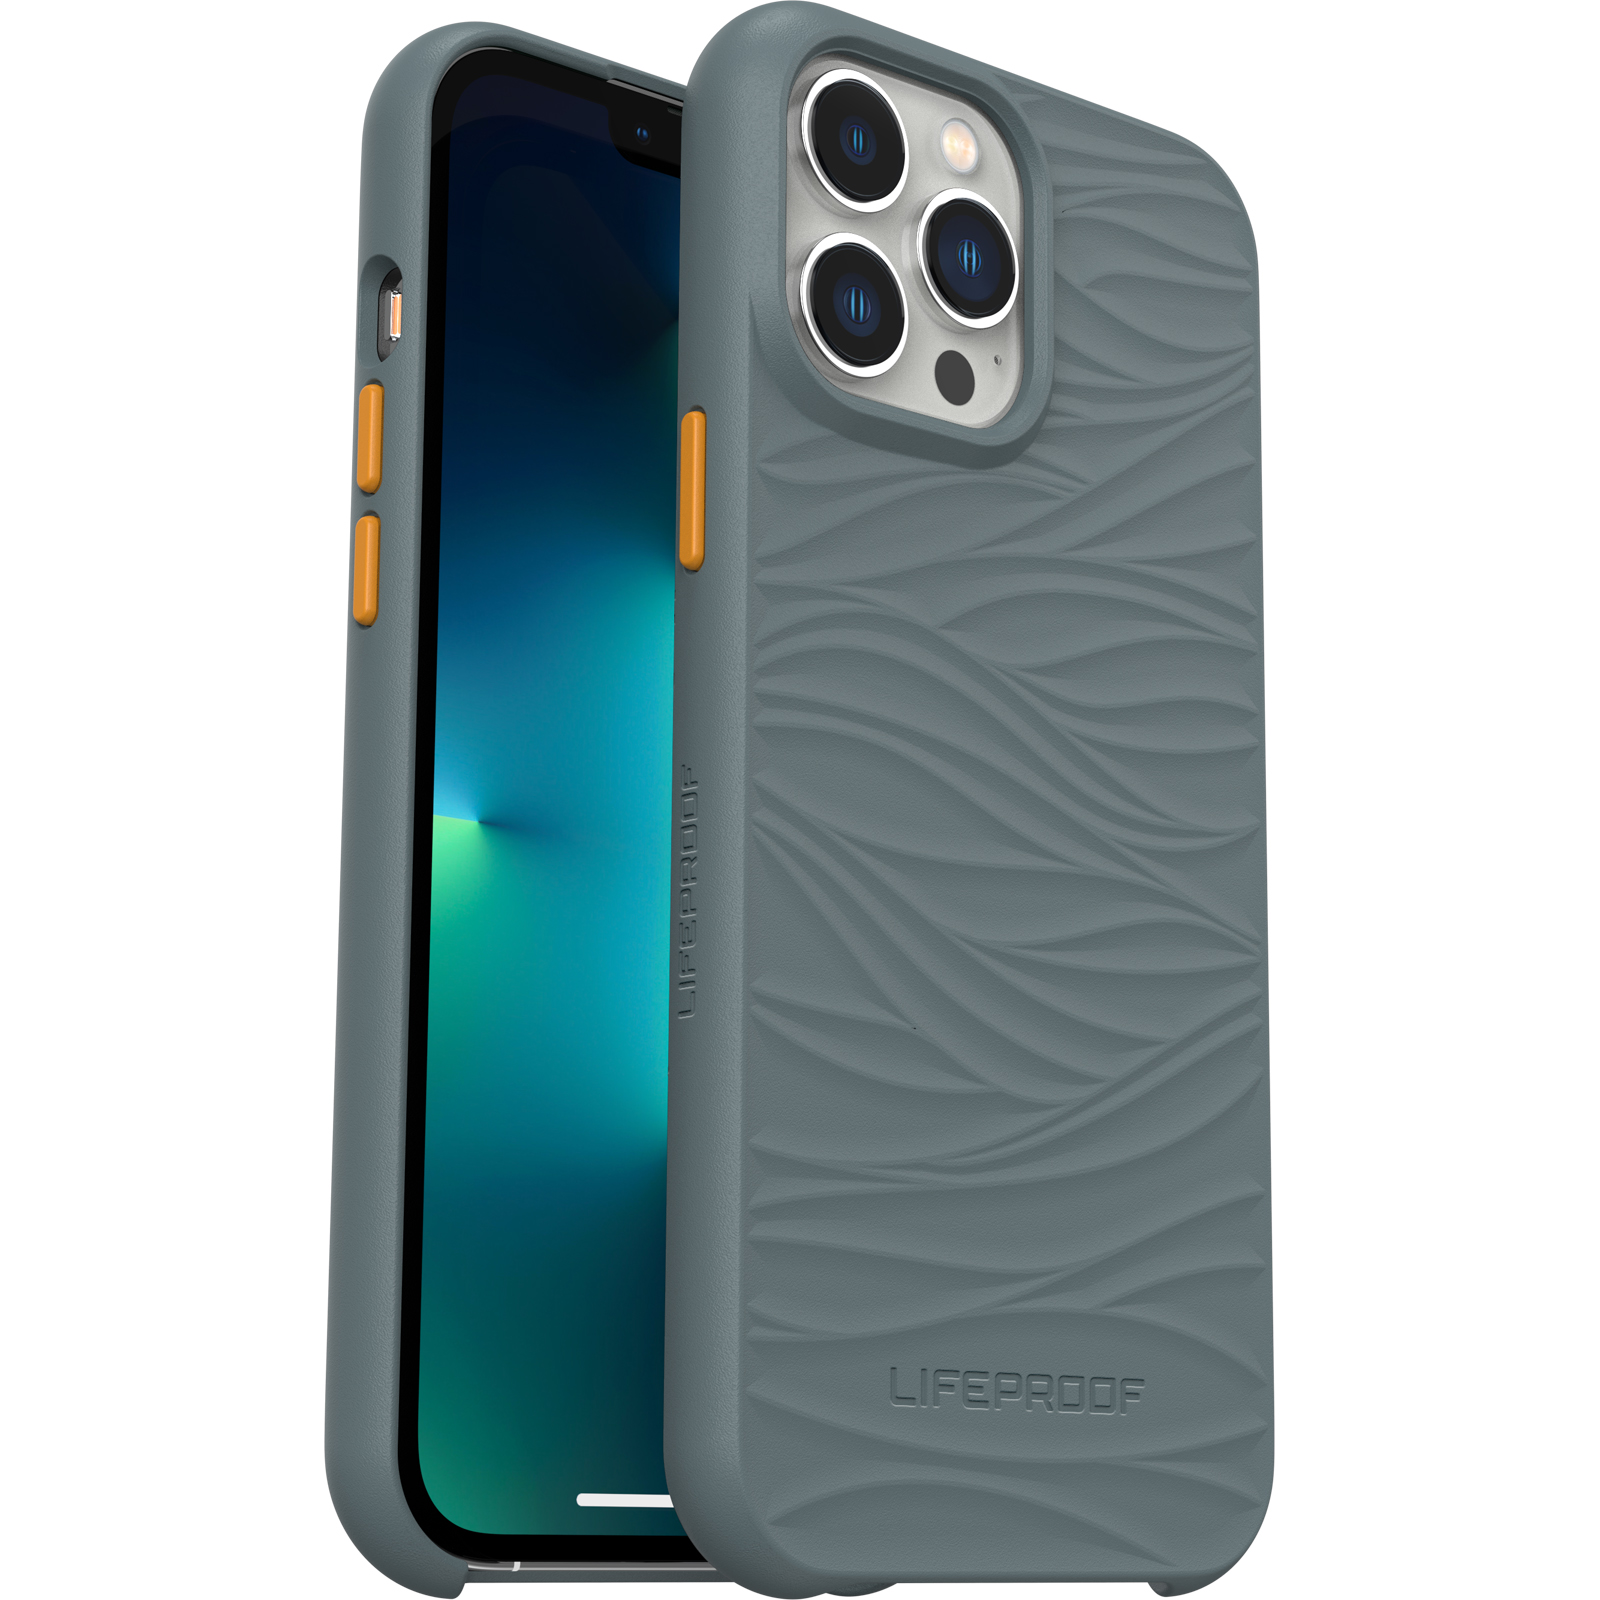 WĀKE Case for iPhone 13 Pro Max and iPhone 12 Pro Max